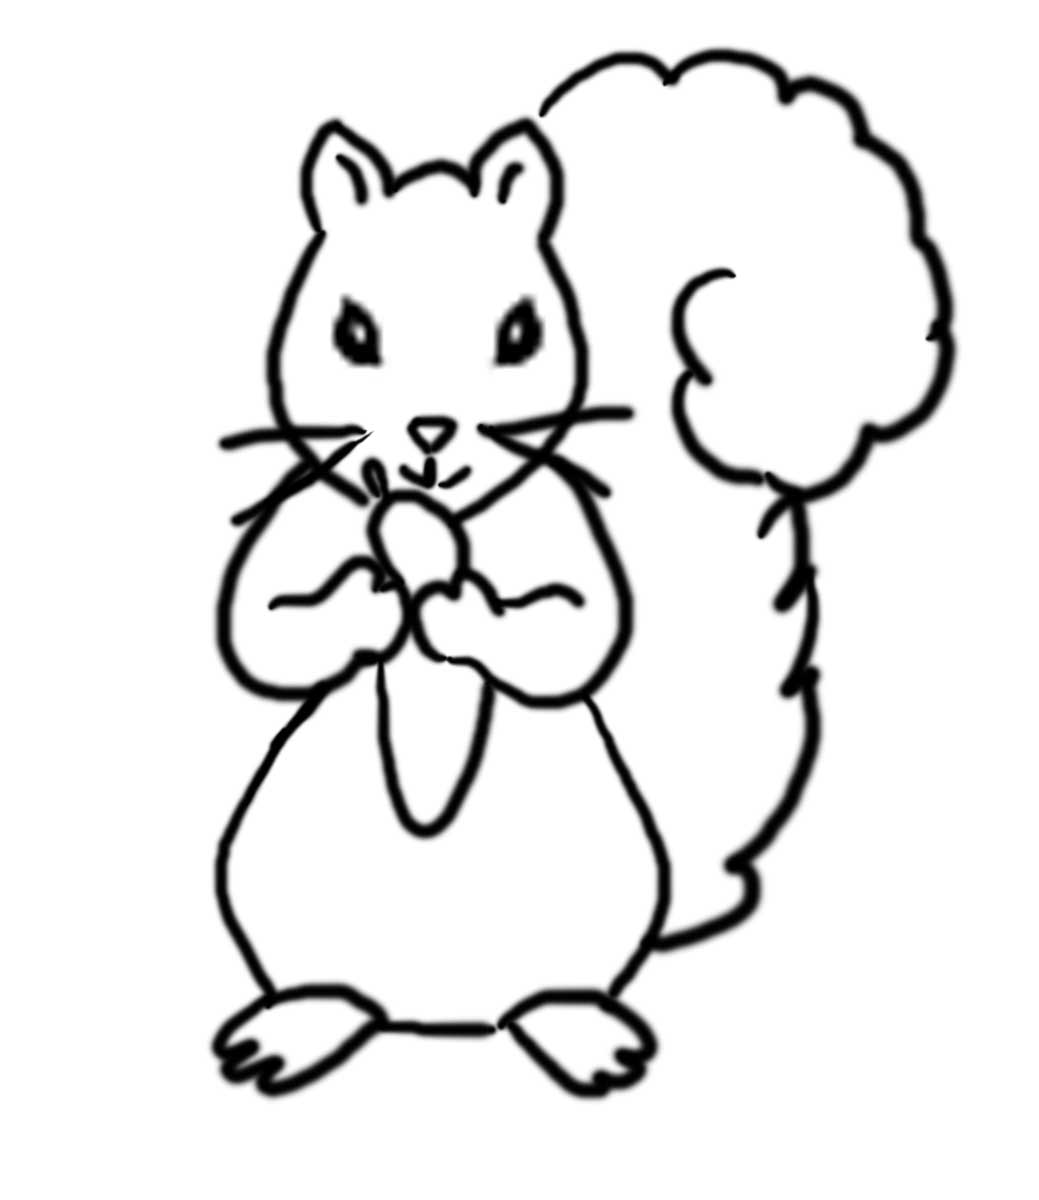 Squirrel Pictures To Print | Free Download Clip Art | Free Clip ...